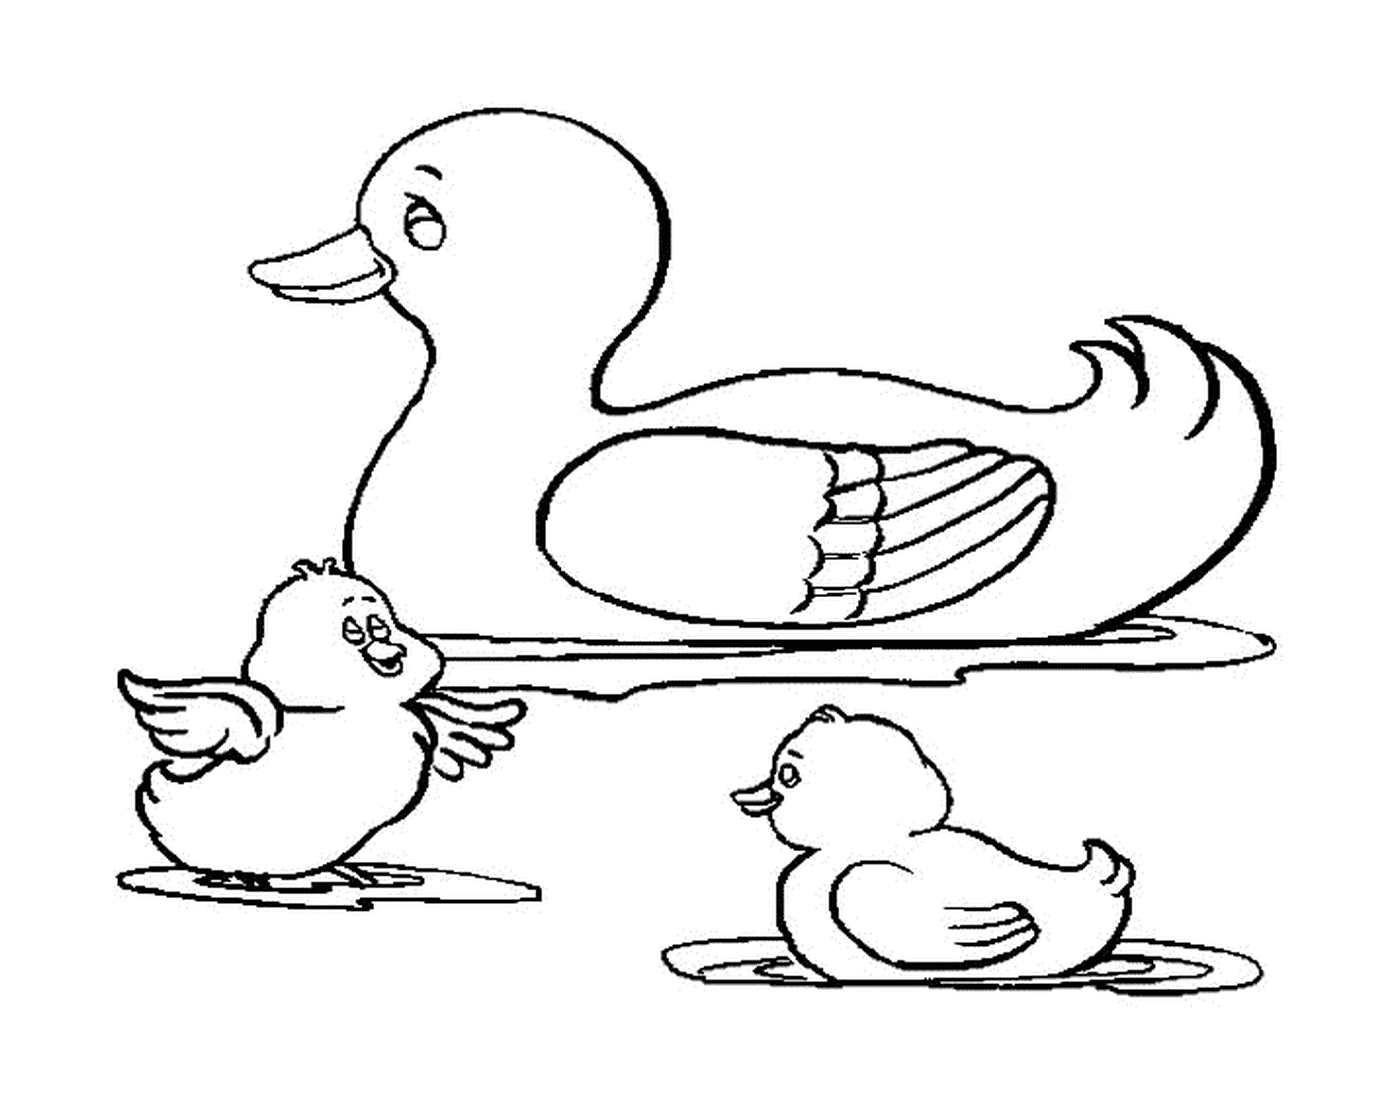  A duck with two ducklings 